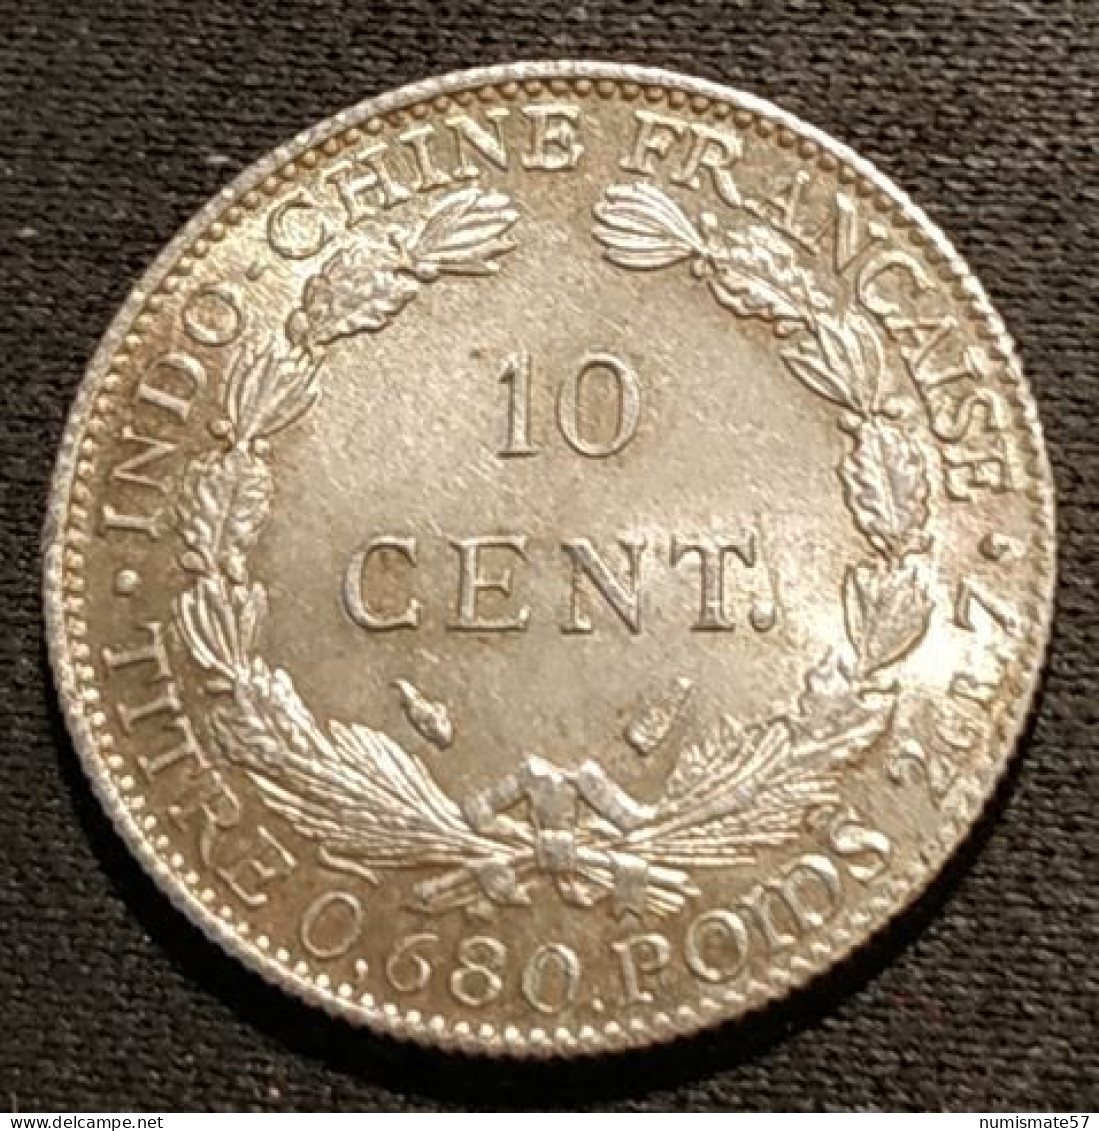 Qualité - INDOCHINE - 10 CENTIMES 1937 - Argent - Silver - KM 16.2 - French Indochina